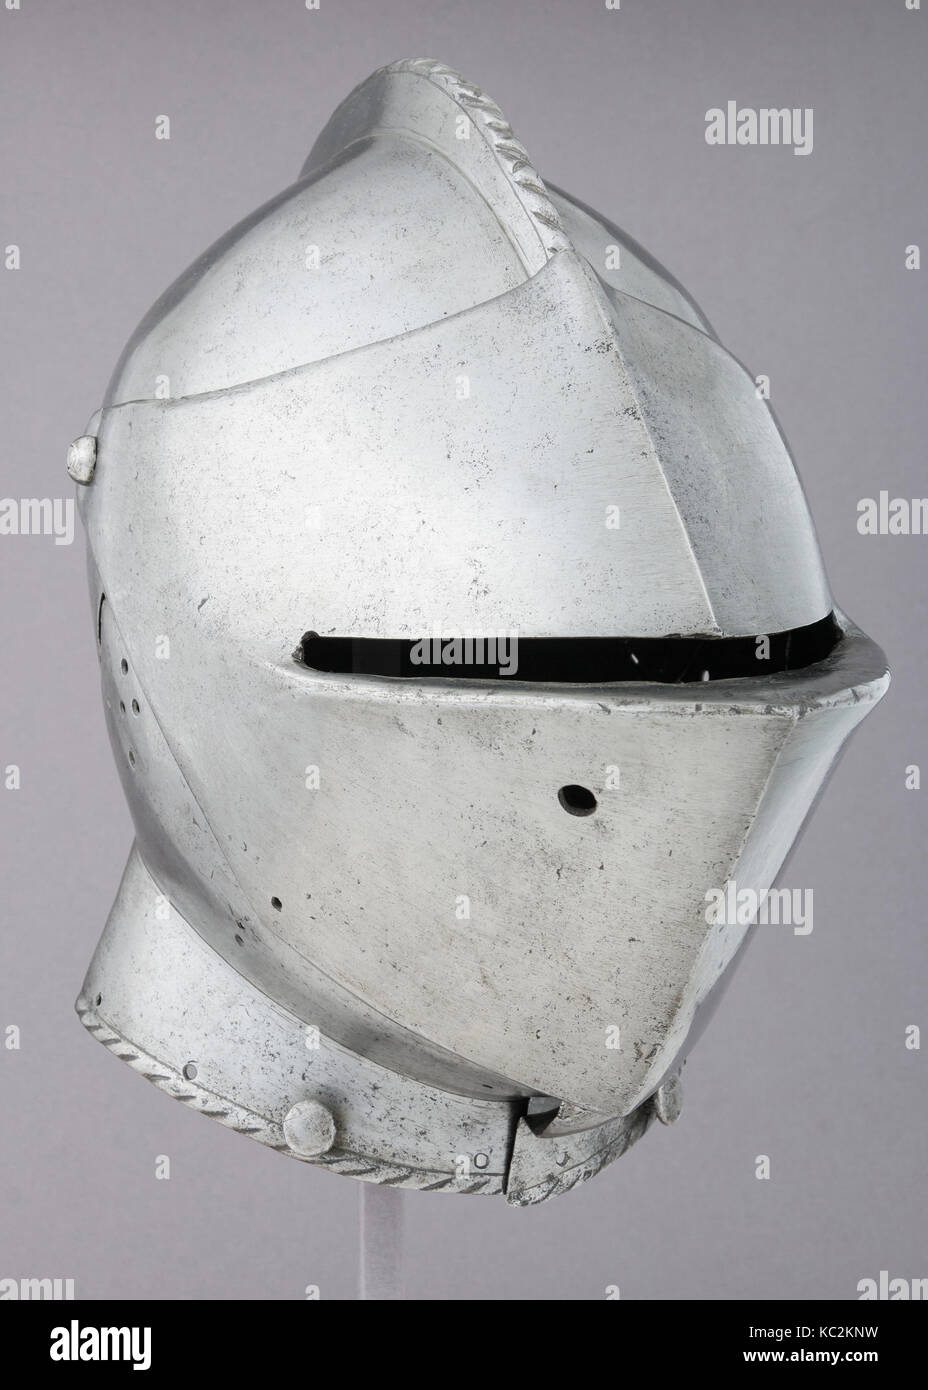 Armet, first half 16th century, French, Steel, H. 12 1/2 in. (31.8 cm); W. 7 3/4 in. (19.7 cm); D. 13 3/4 in. (34.9 cm); Wt. 6 Stock Photo